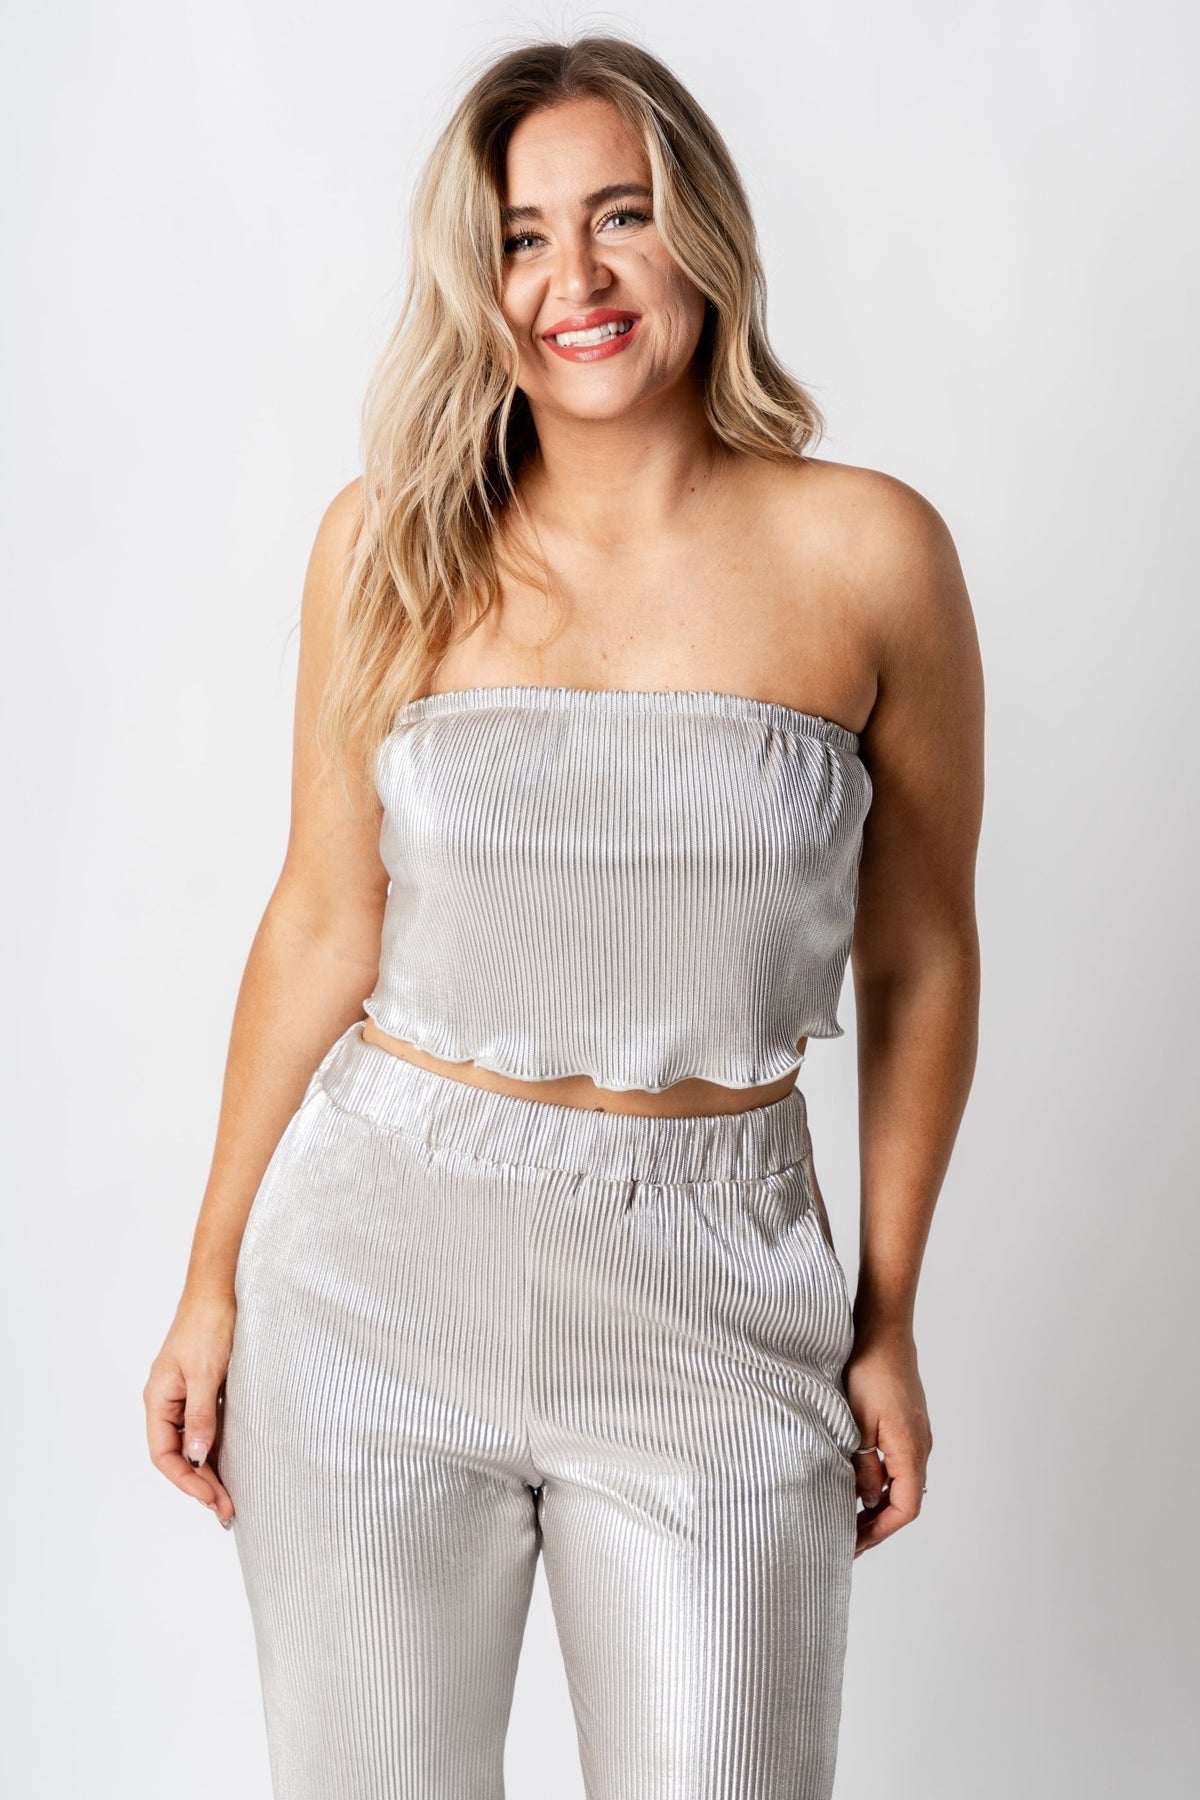 Pleated shimmer strapless top taupe/silver - Trendy Holiday Apparel at Lush Fashion Lounge Boutique in Oklahoma City